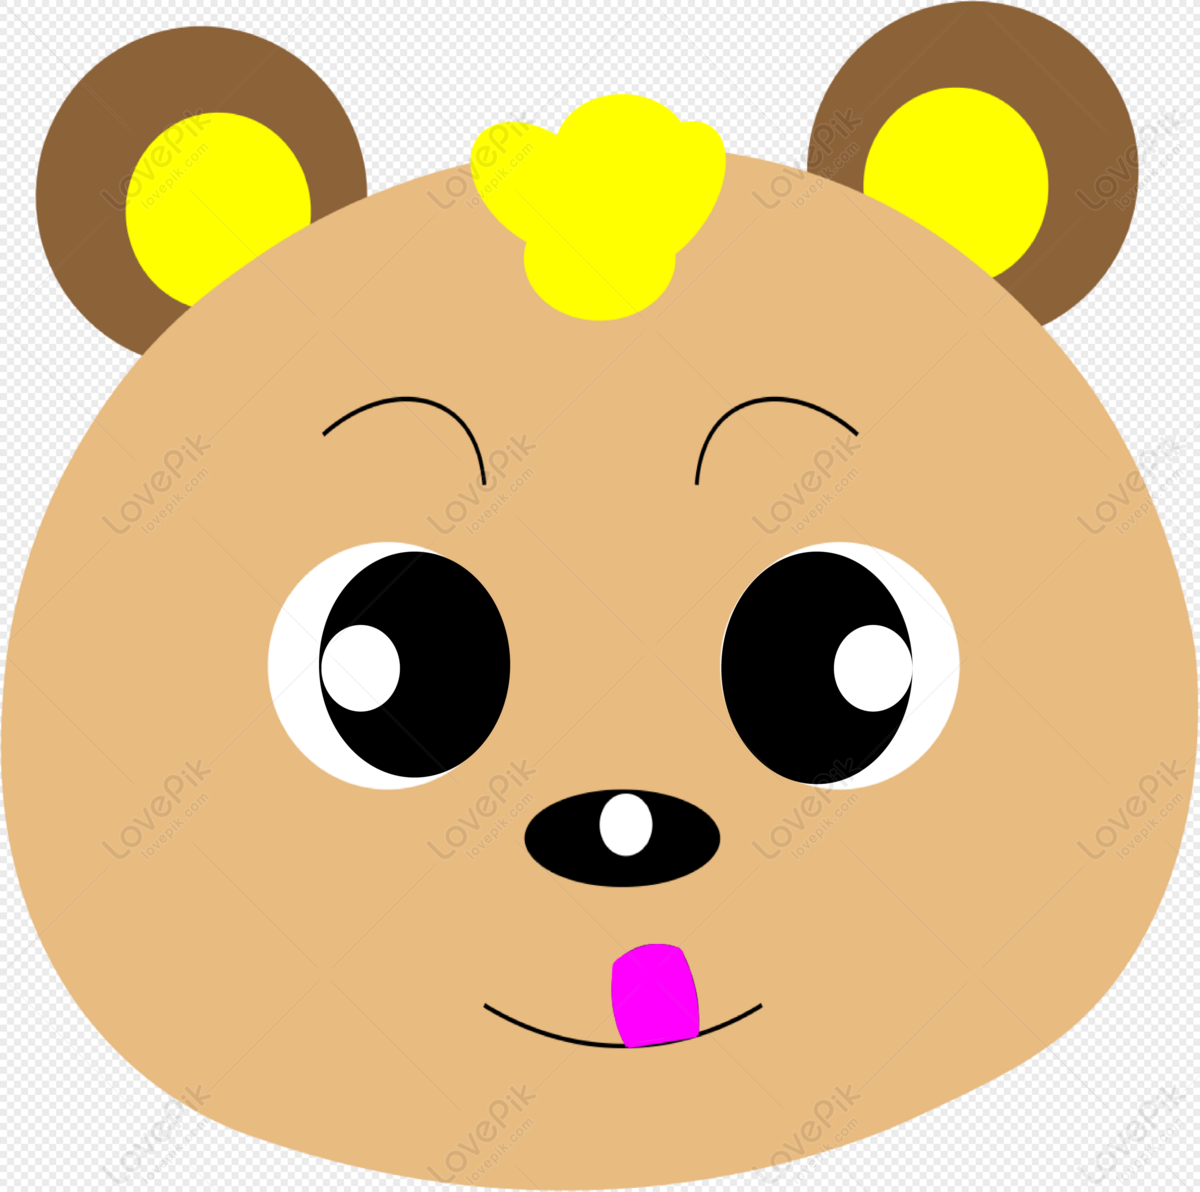 Cute Little Bear Head PNG Transparent Image And Clipart Image For Free  Download - Lovepik | 401038527